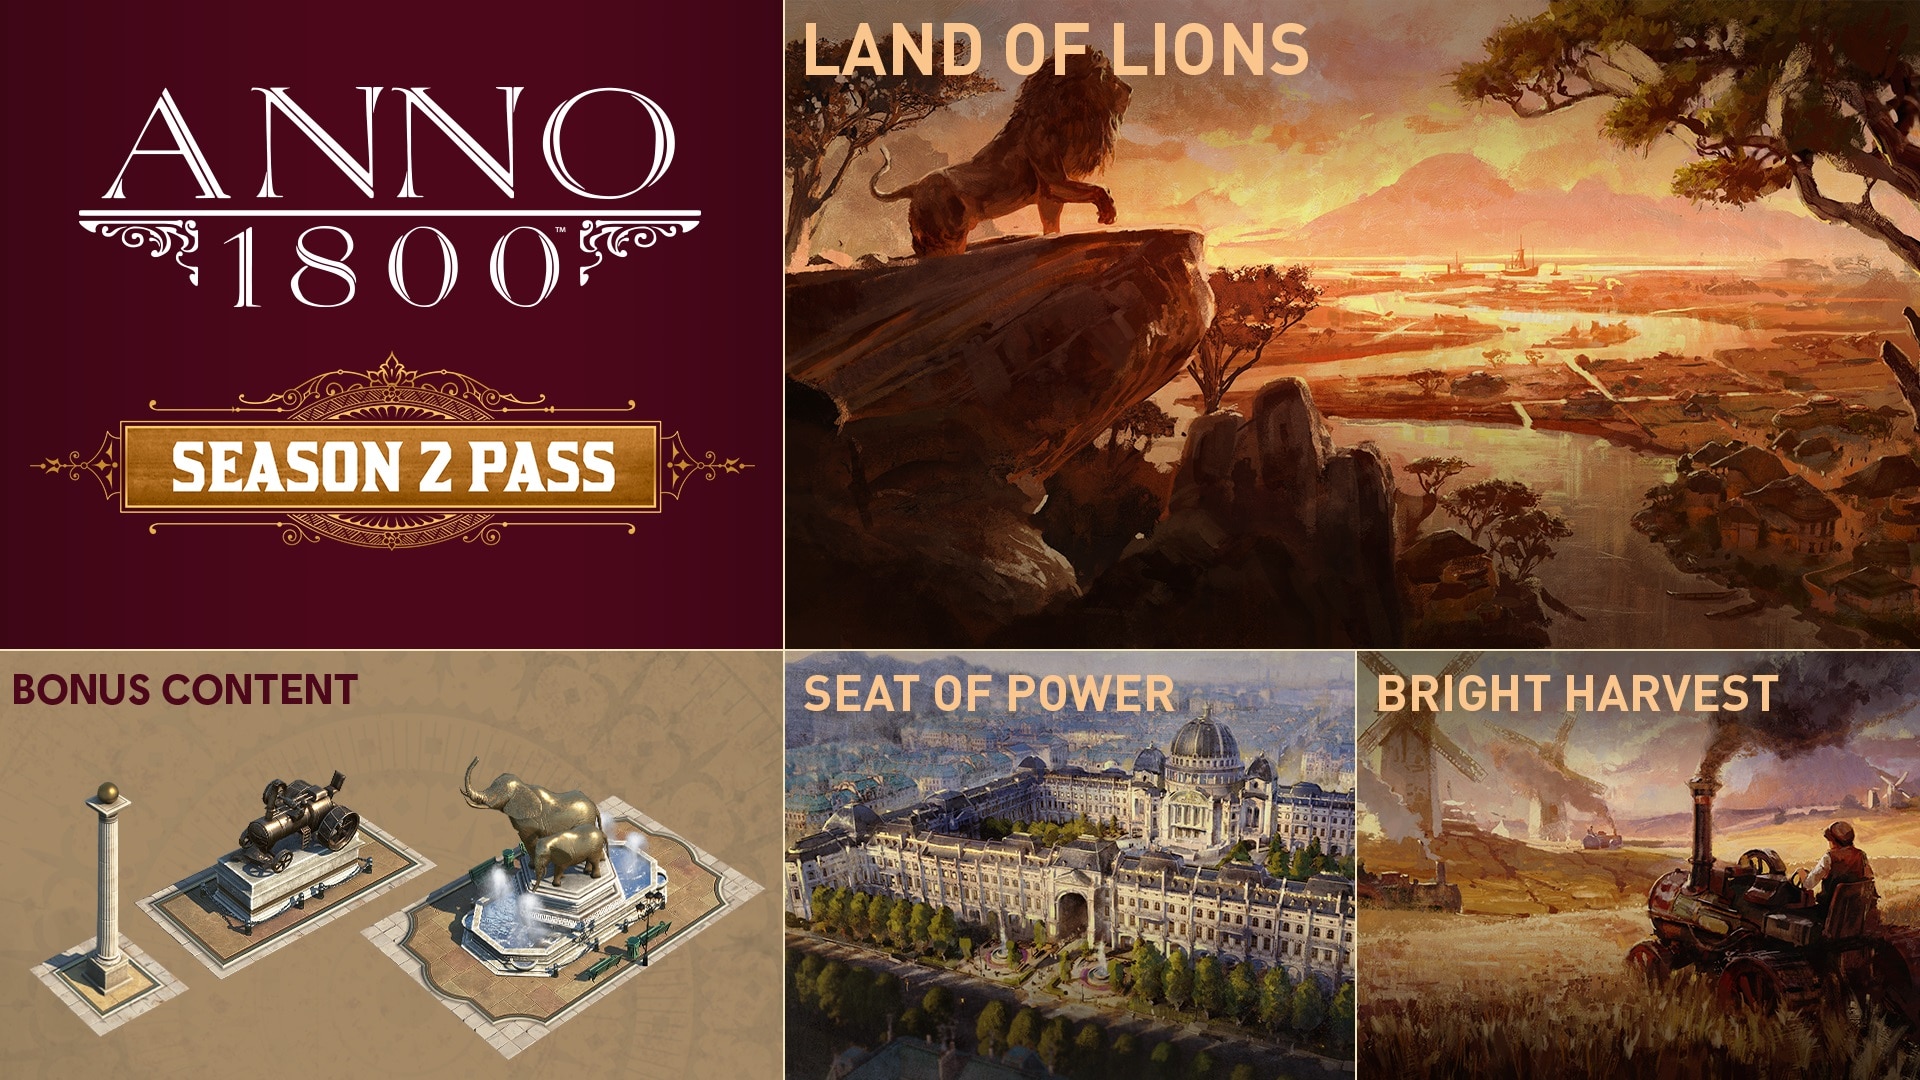 Anno 1800 All Dlcs Contents of the Anno 1800 Season 2 Pass | Ubisoft Help